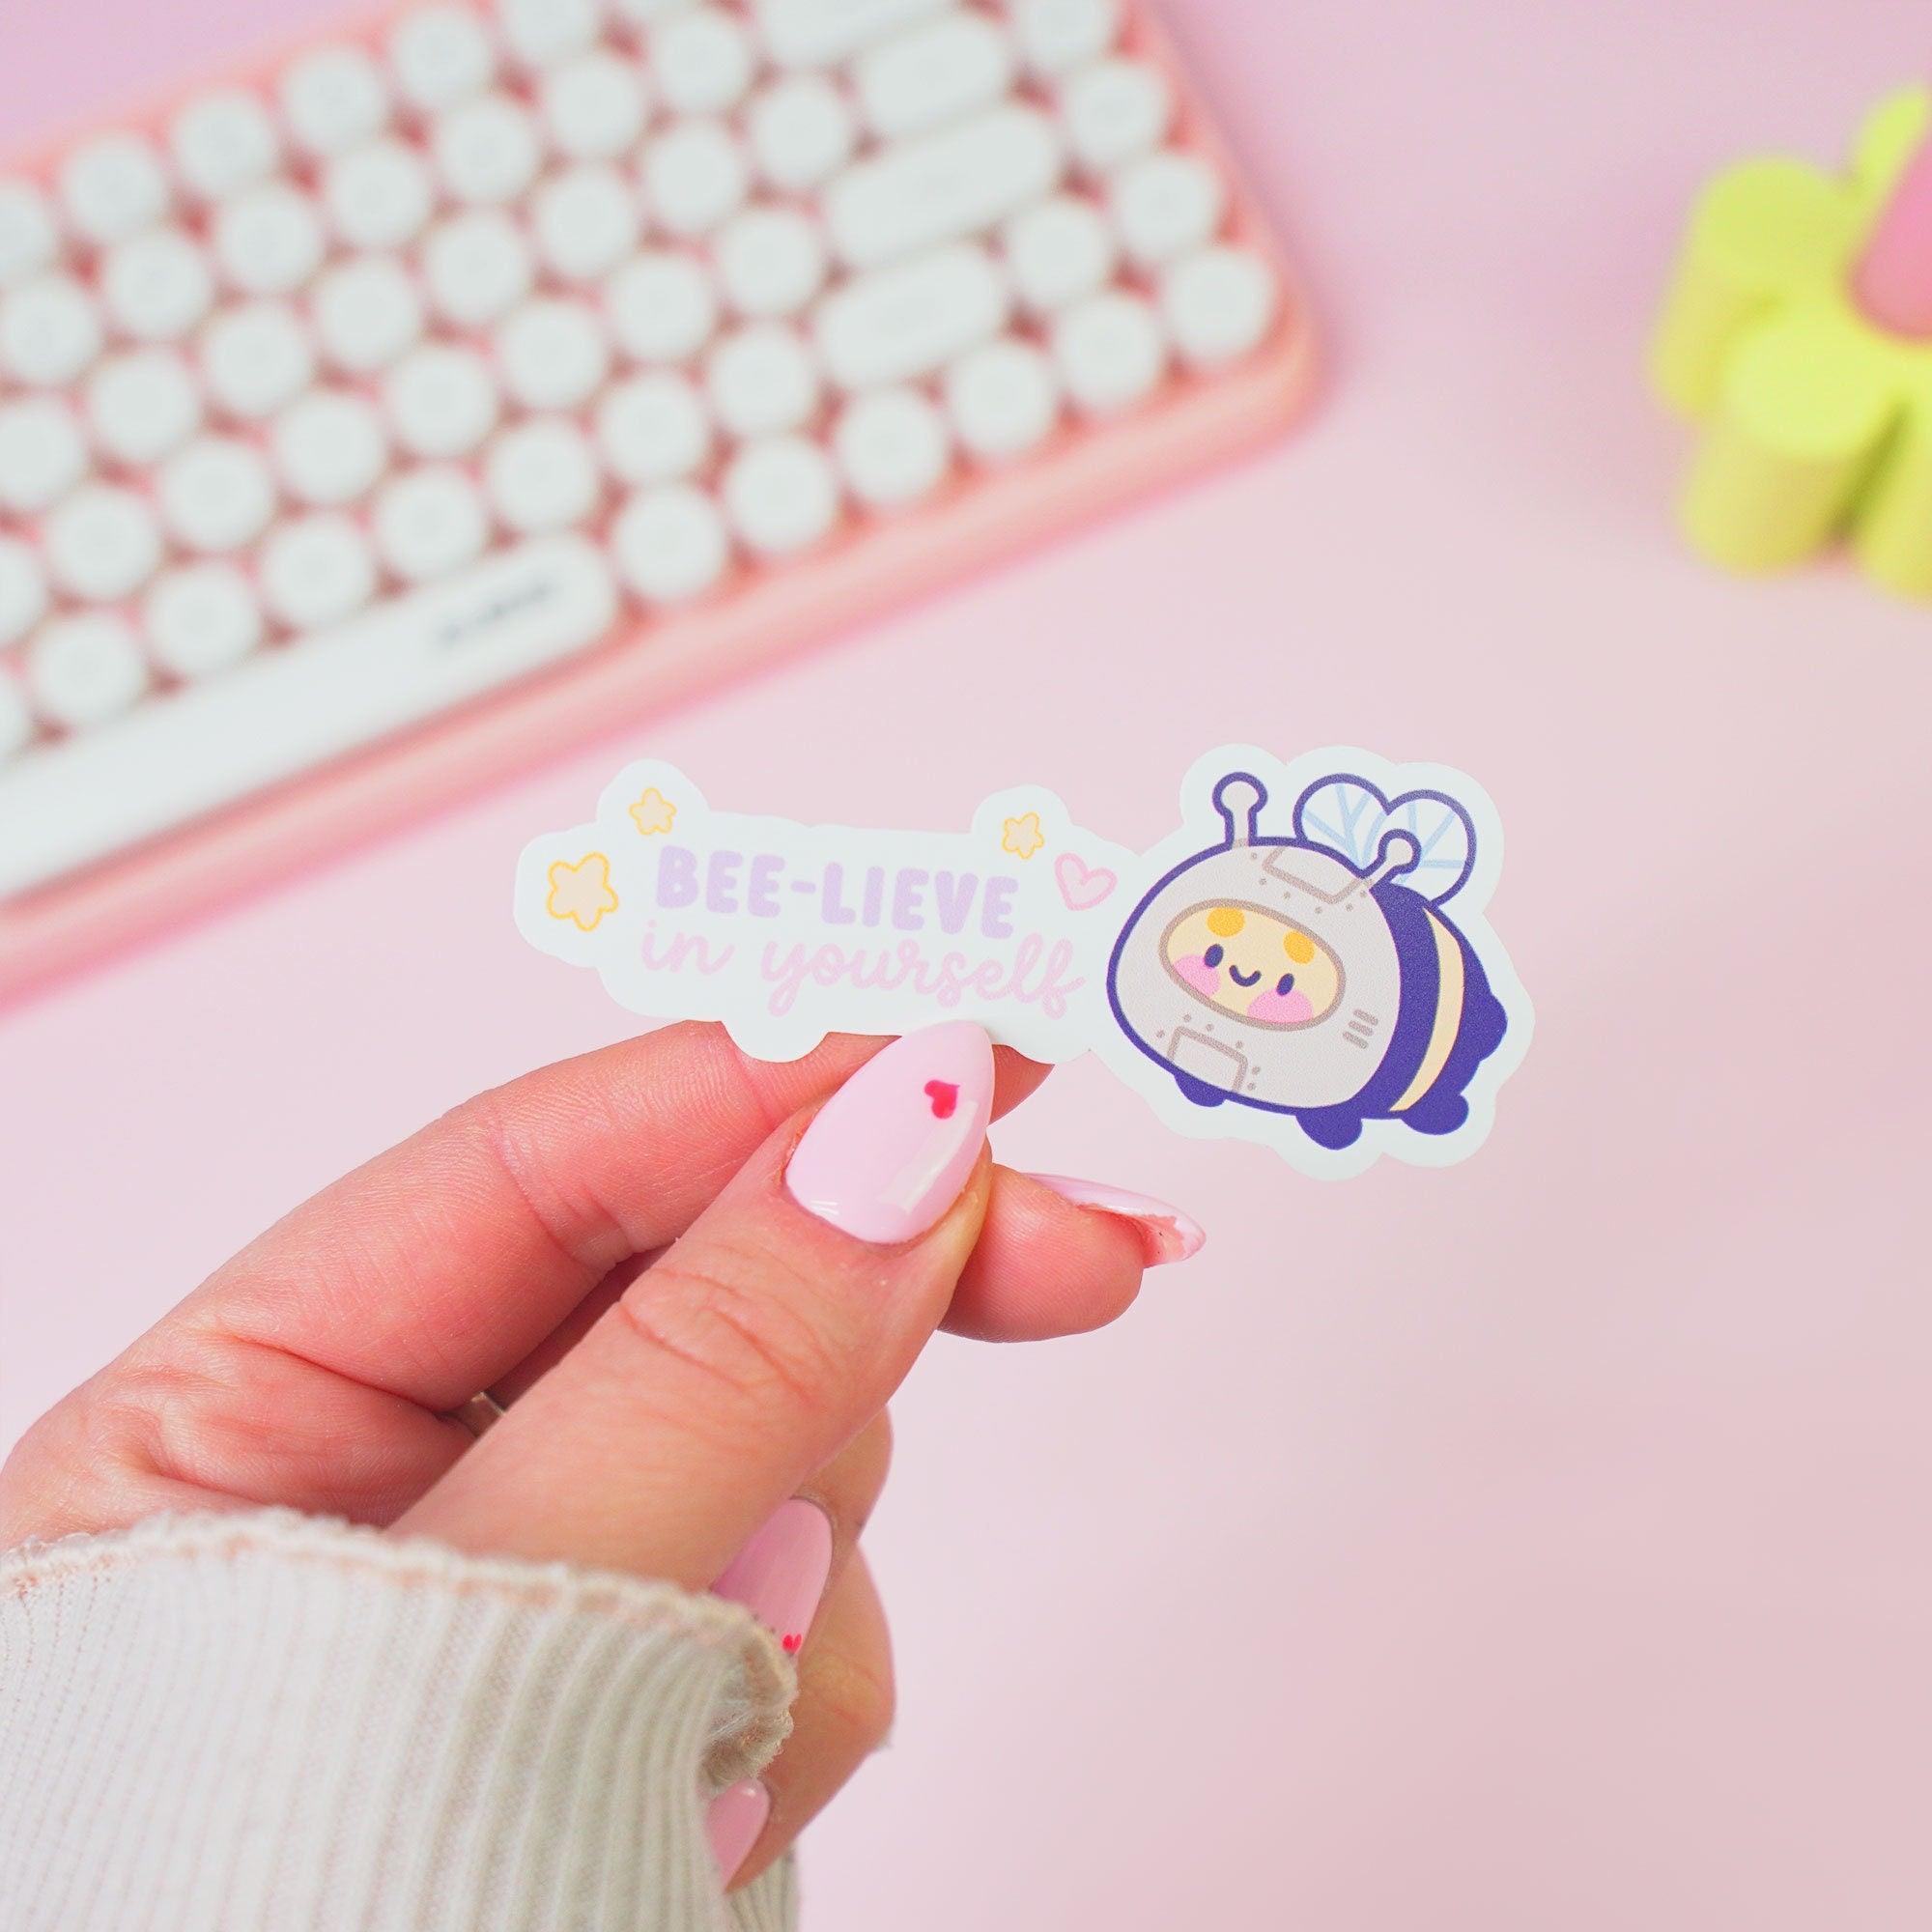 Image of Bumblebutt 'Bee-Lieve in Yourself' die-cut vinyl sticker on a white background. 2